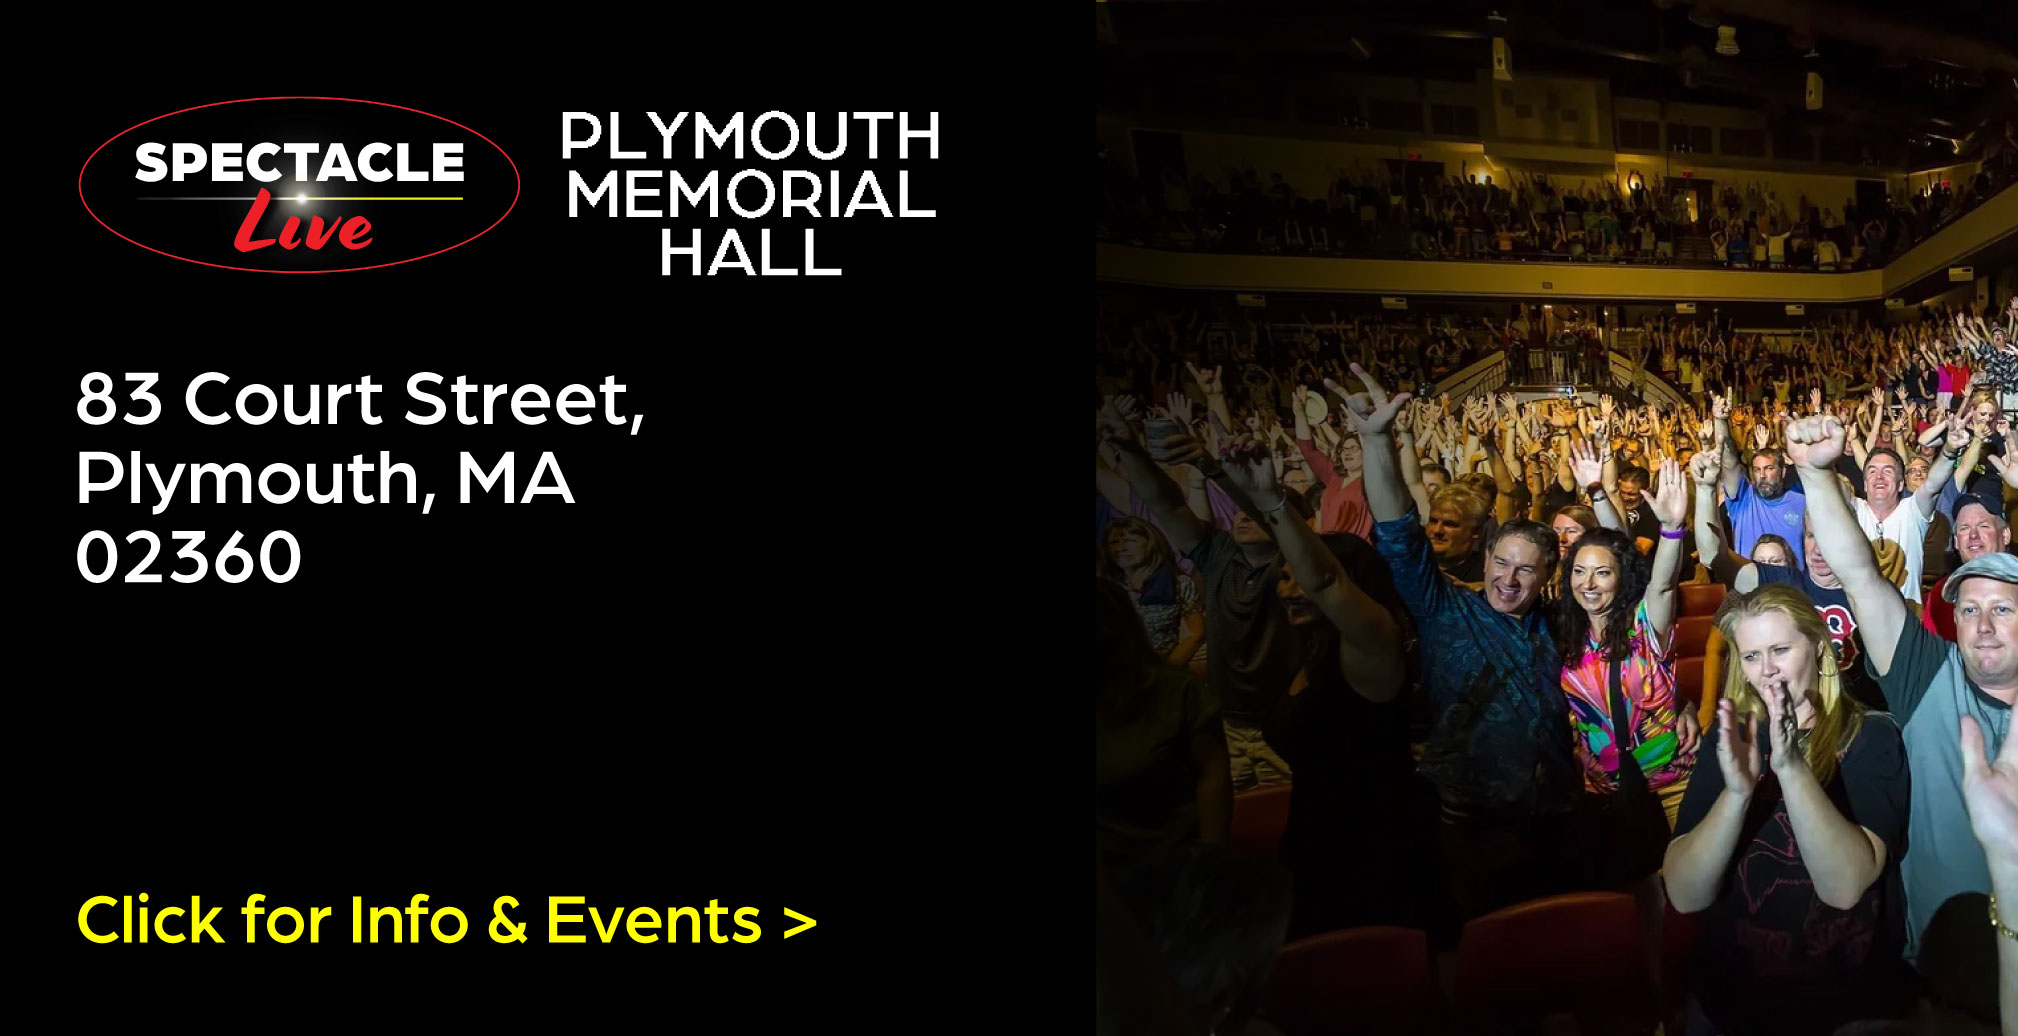 Learn more about Plymouth Memorial Hall